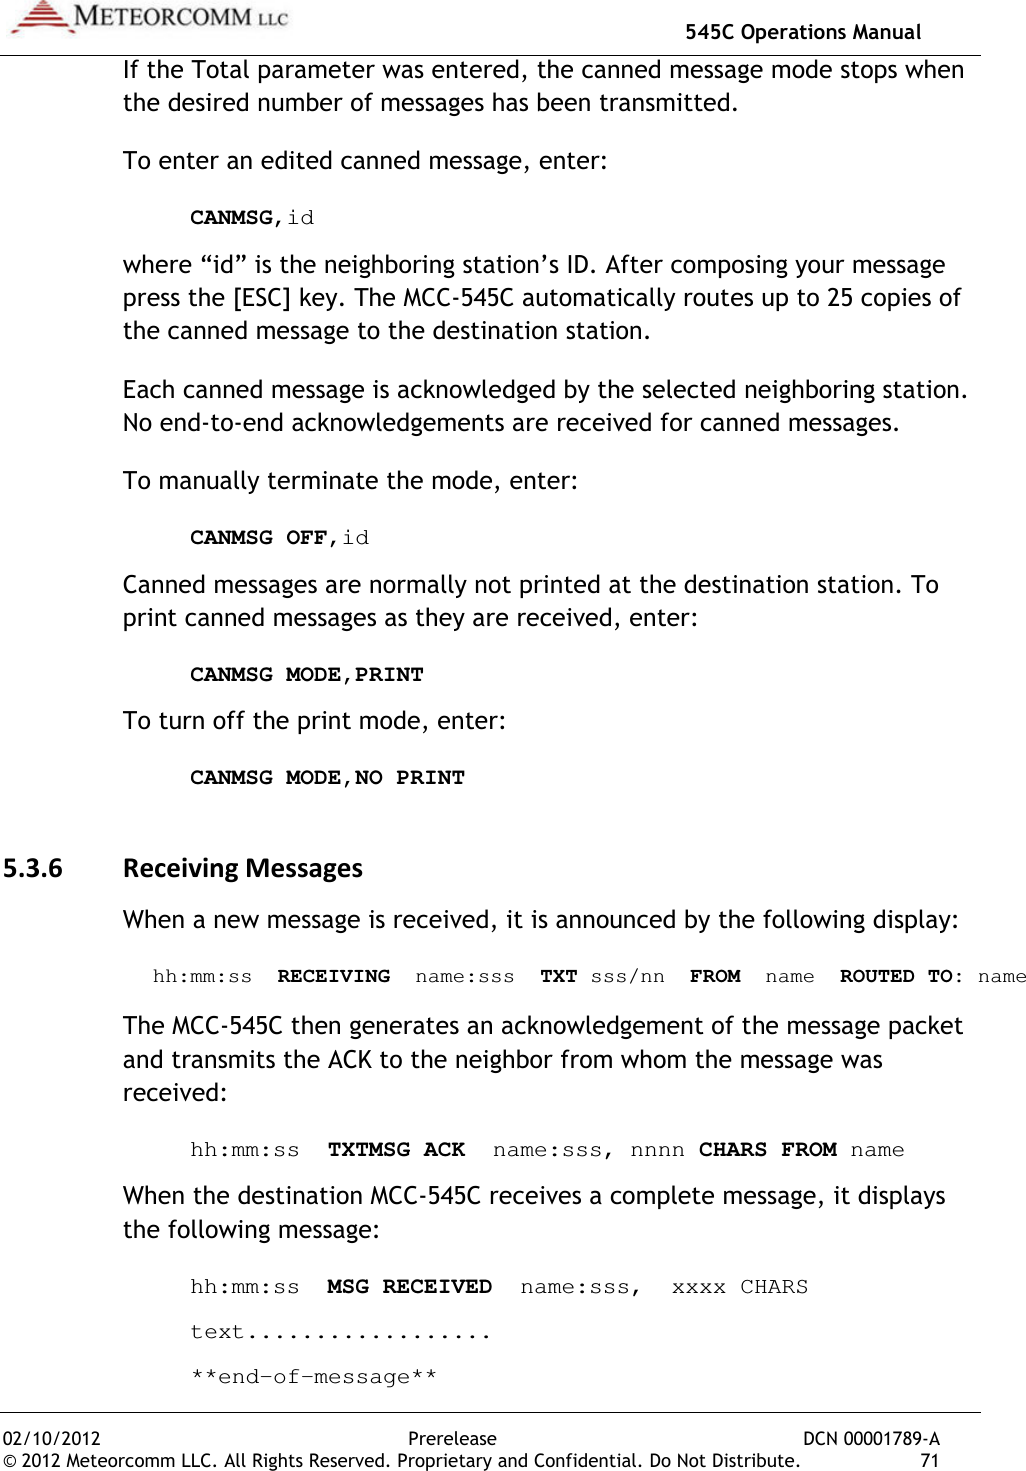   545C Operations Manual 02/10/2012  Prerelease  DCN 00001789-A © 2012 Meteorcomm LLC. All Rights Reserved. Proprietary and Confidential. Do Not Distribute.  71 If the Total parameter was entered, the canned message mode stops when the desired number of messages has been transmitted. To enter an edited canned message, enter:  CANMSG,id where “id” is the neighboring station’s ID. After composing your message press the [ESC] key. The MCC-545C automatically routes up to 25 copies of the canned message to the destination station. Each canned message is acknowledged by the selected neighboring station. No end-to-end acknowledgements are received for canned messages. To manually terminate the mode, enter:  CANMSG OFF,id Canned messages are normally not printed at the destination station. To print canned messages as they are received, enter:   CANMSG MODE,PRINT To turn off the print mode, enter:   CANMSG MODE,NO PRINT 5.3.6 Receiving Messages When a new message is received, it is announced by the following display:  hh:mm:ss  RECEIVING  name:sss  TXT sss/nn  FROM  name  ROUTED TO: name The MCC-545C then generates an acknowledgement of the message packet and transmits the ACK to the neighbor from whom the message was received:   hh:mm:ss  TXTMSG ACK  name:sss, nnnn CHARS FROM name When the destination MCC-545C receives a complete message, it displays the following message:   hh:mm:ss  MSG RECEIVED  name:sss,  xxxx CHARS   text..................   **end-of-message** 